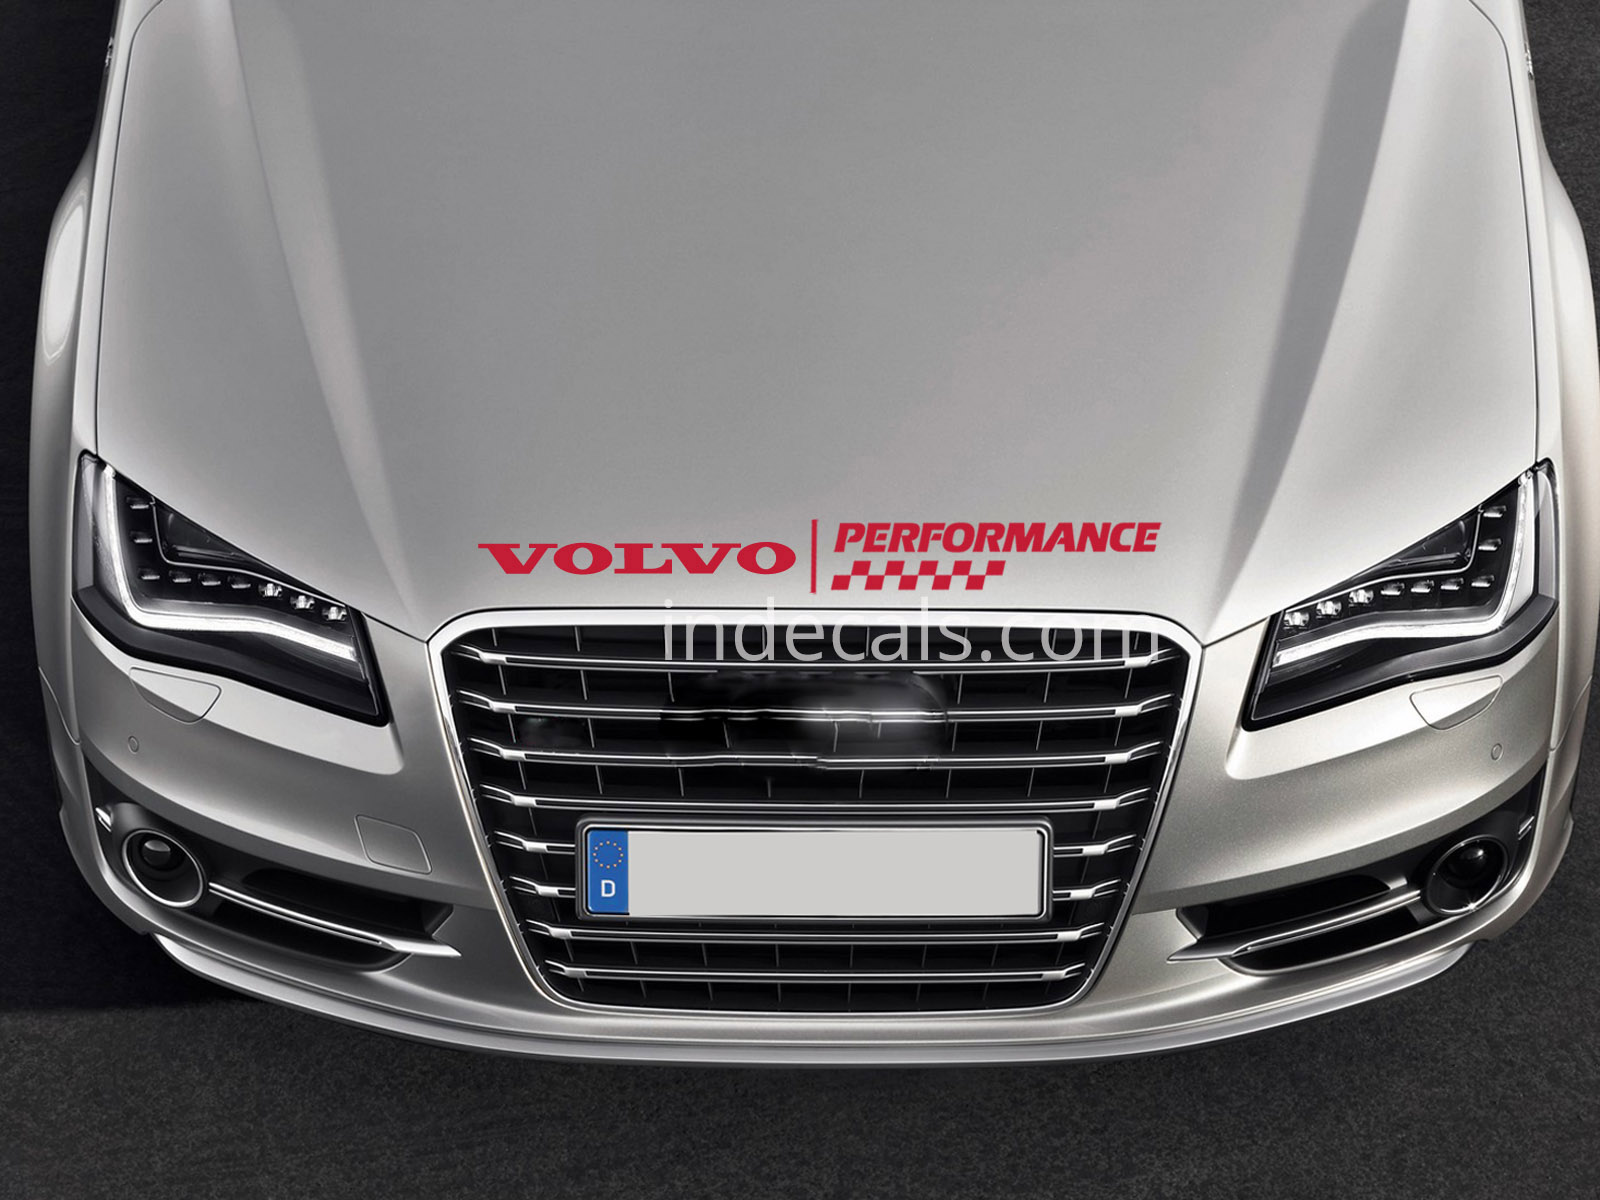 1 x Volvo Performance Sticker for Bonnet - Red